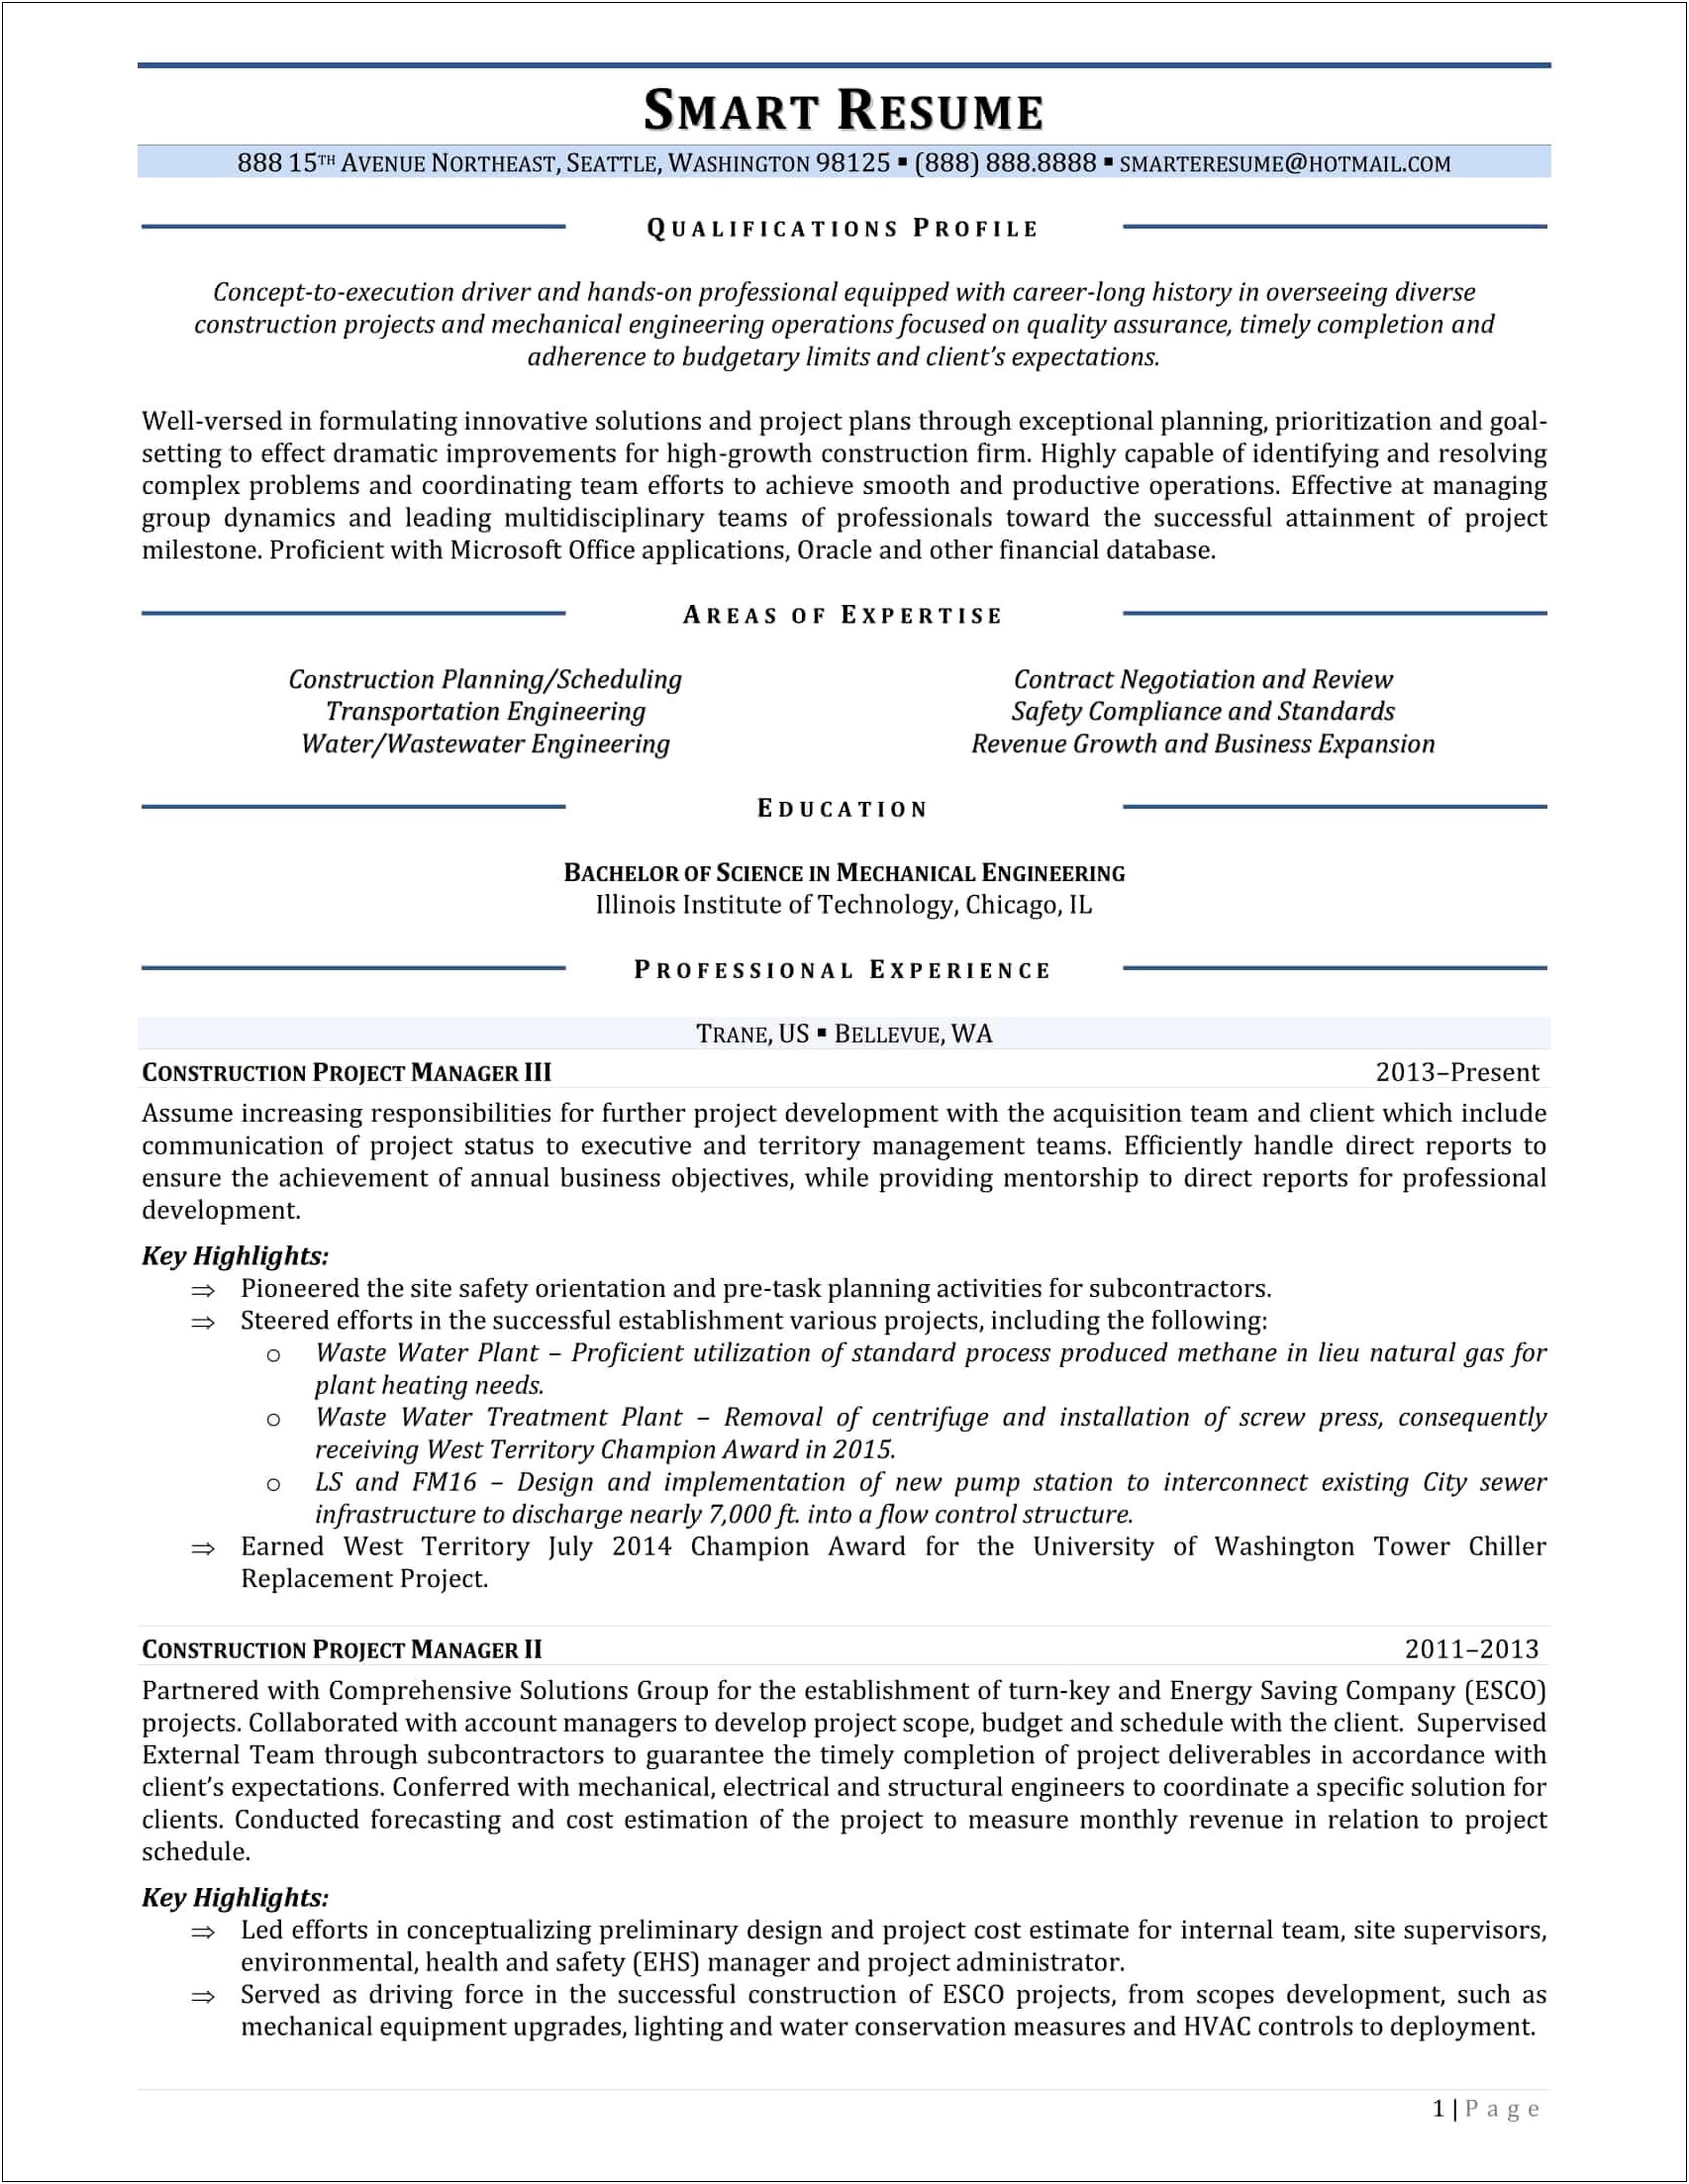 Professional Resume Construction Project Manager